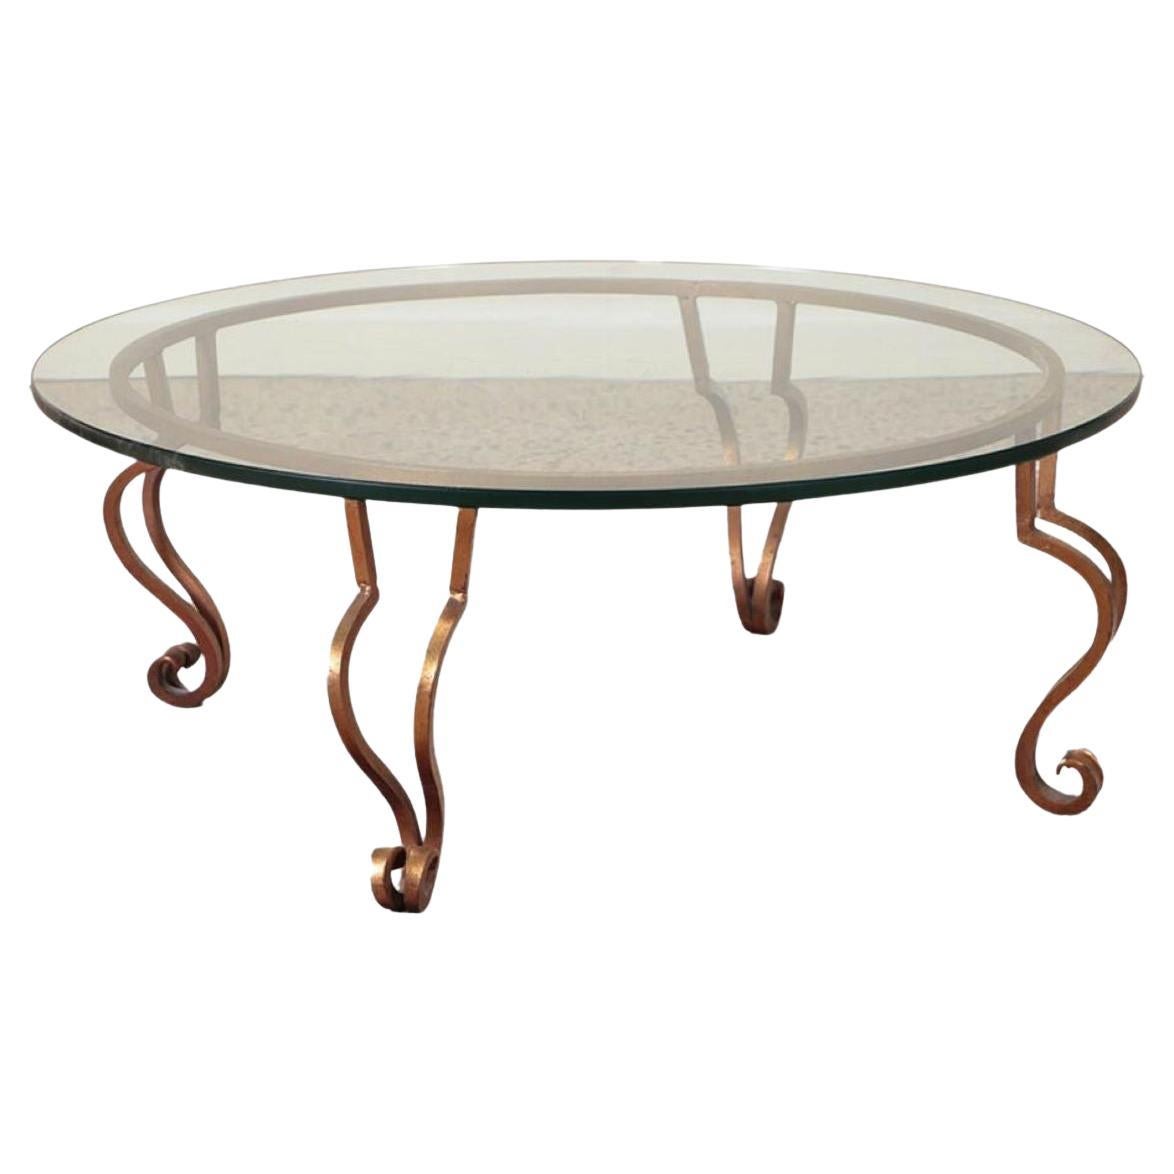 A gilt iron, glass top coffee table in the manner of Ramsay circa 1975.